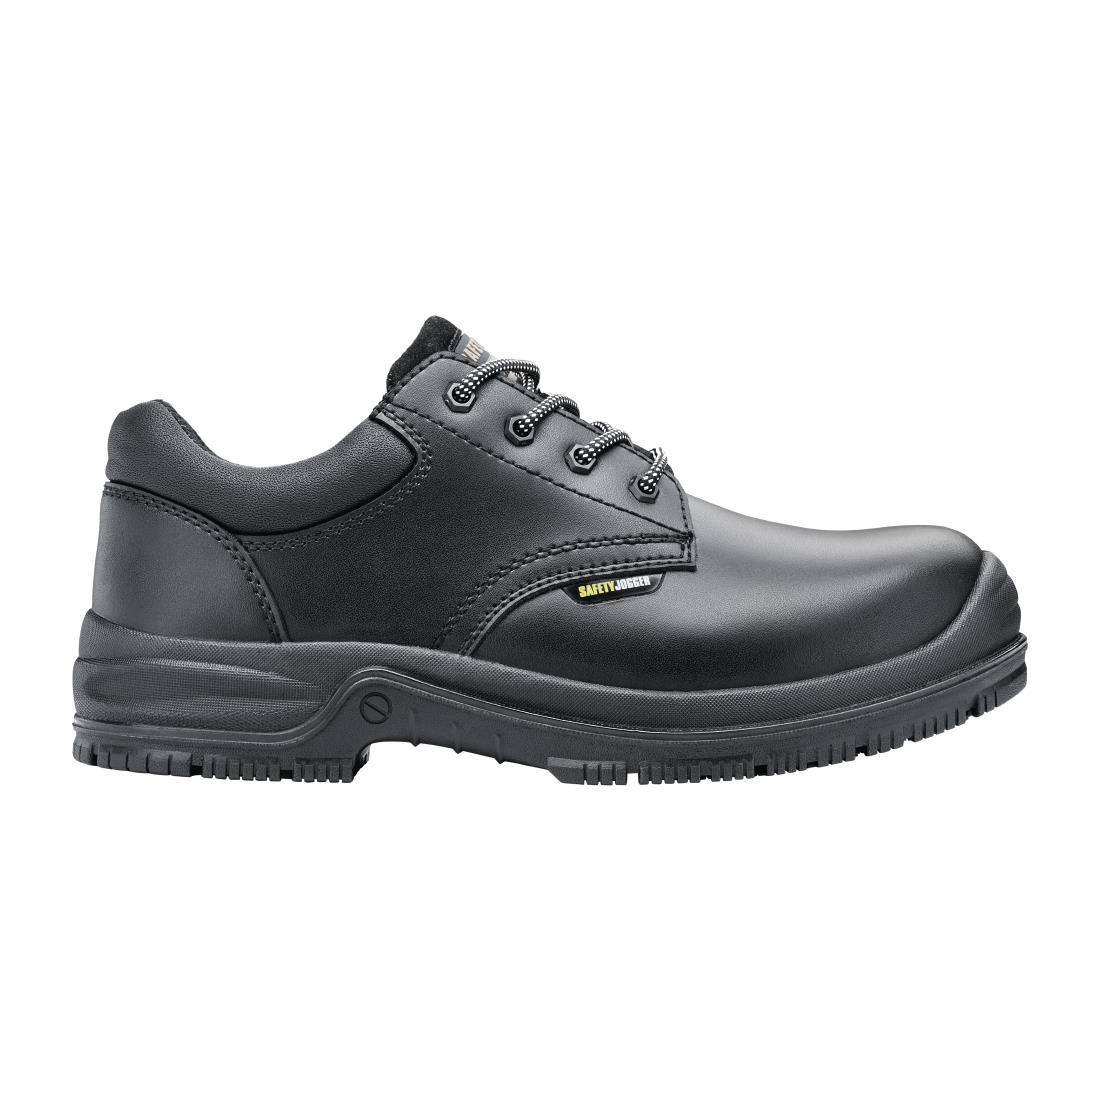 Shoes for Crews X111081 Safety Shoe Black Size 47 - BB596-47  - 1